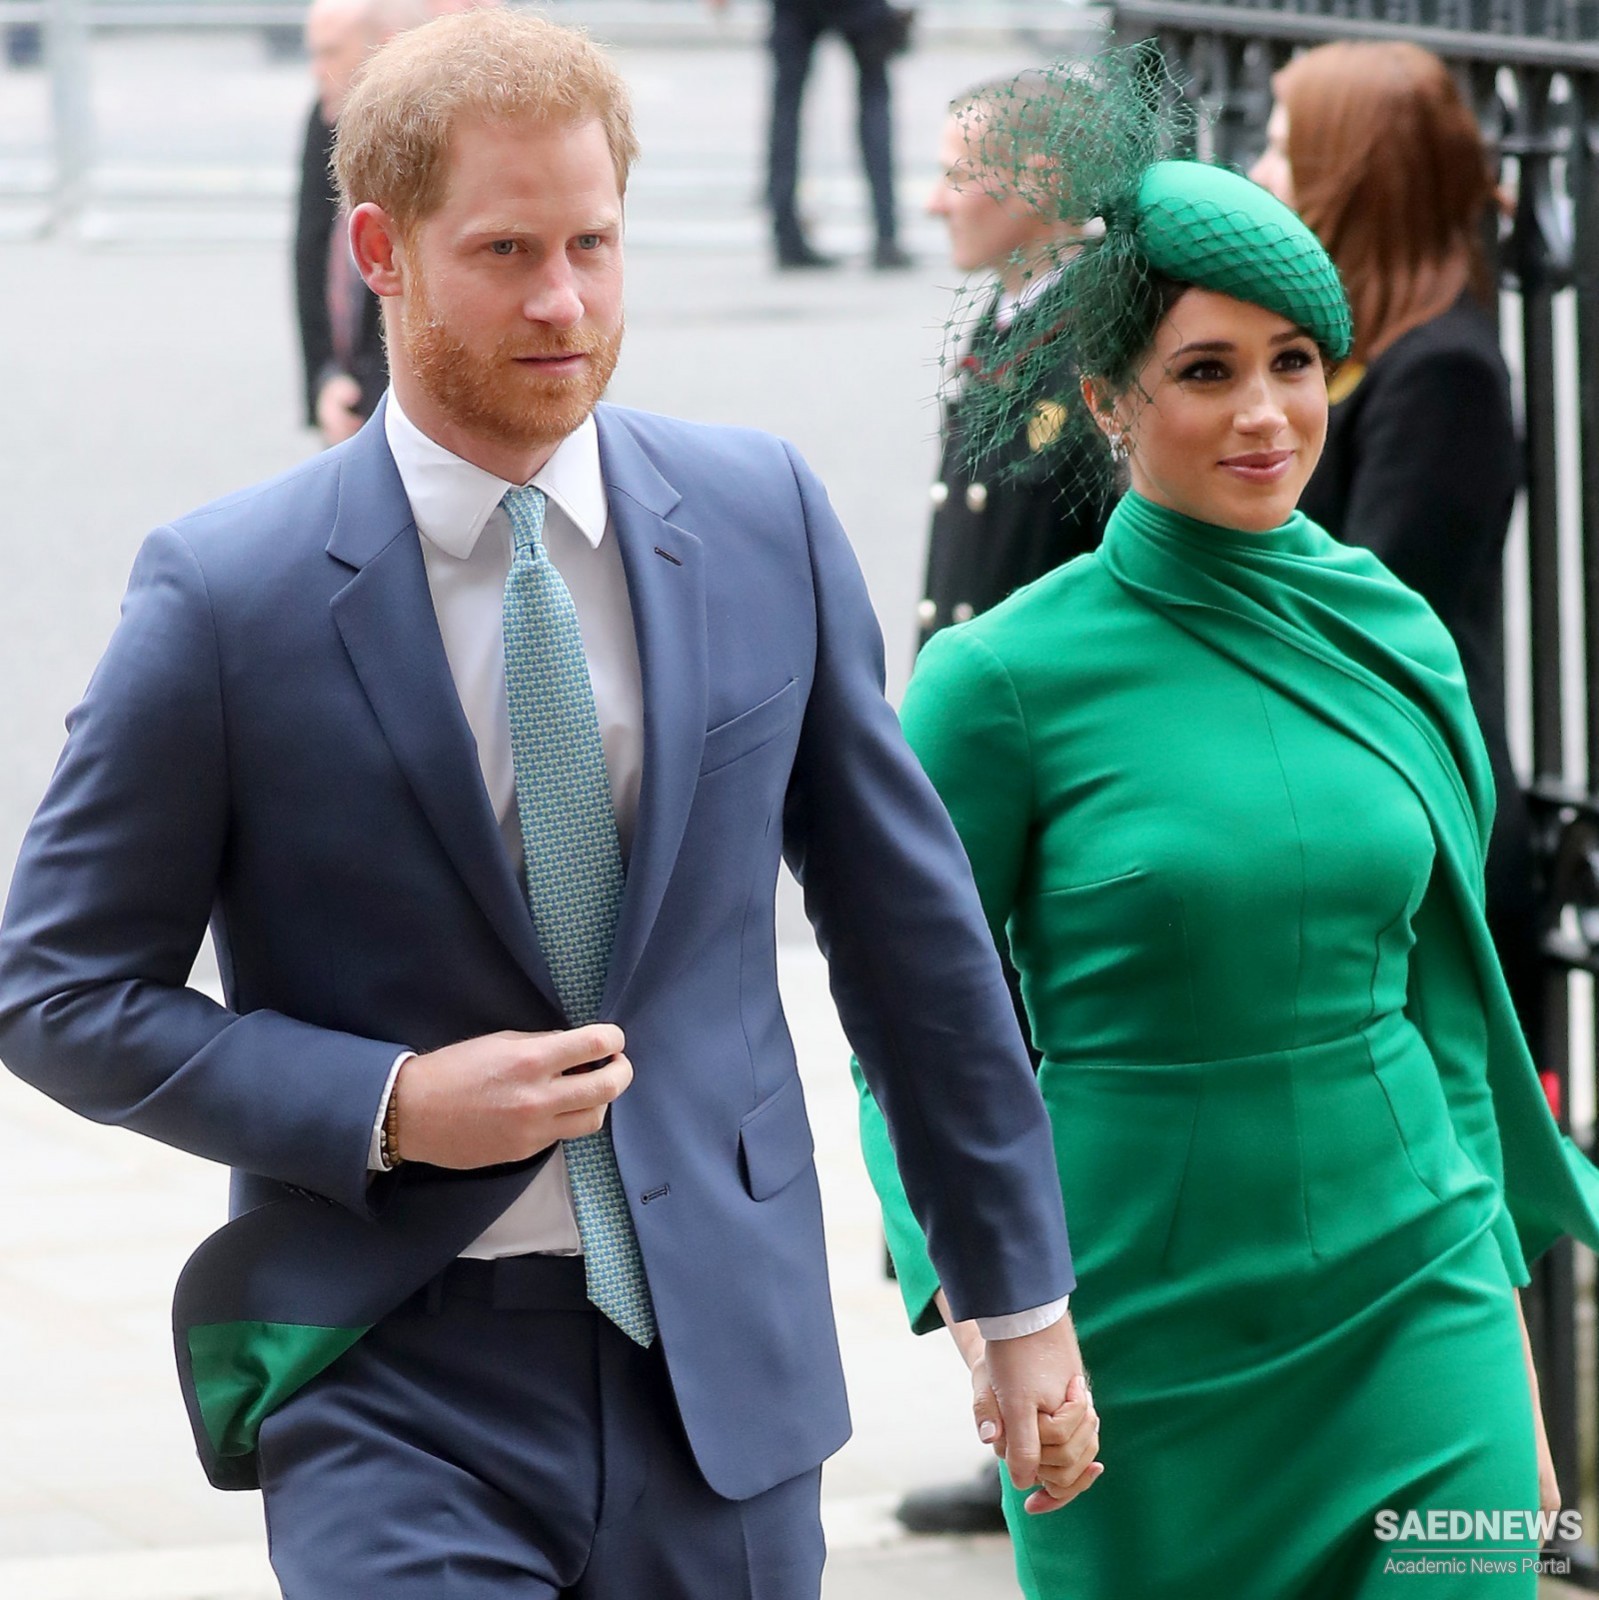 Prince Harry and Meghan Markle Announce They Are Expecting Their Second Child